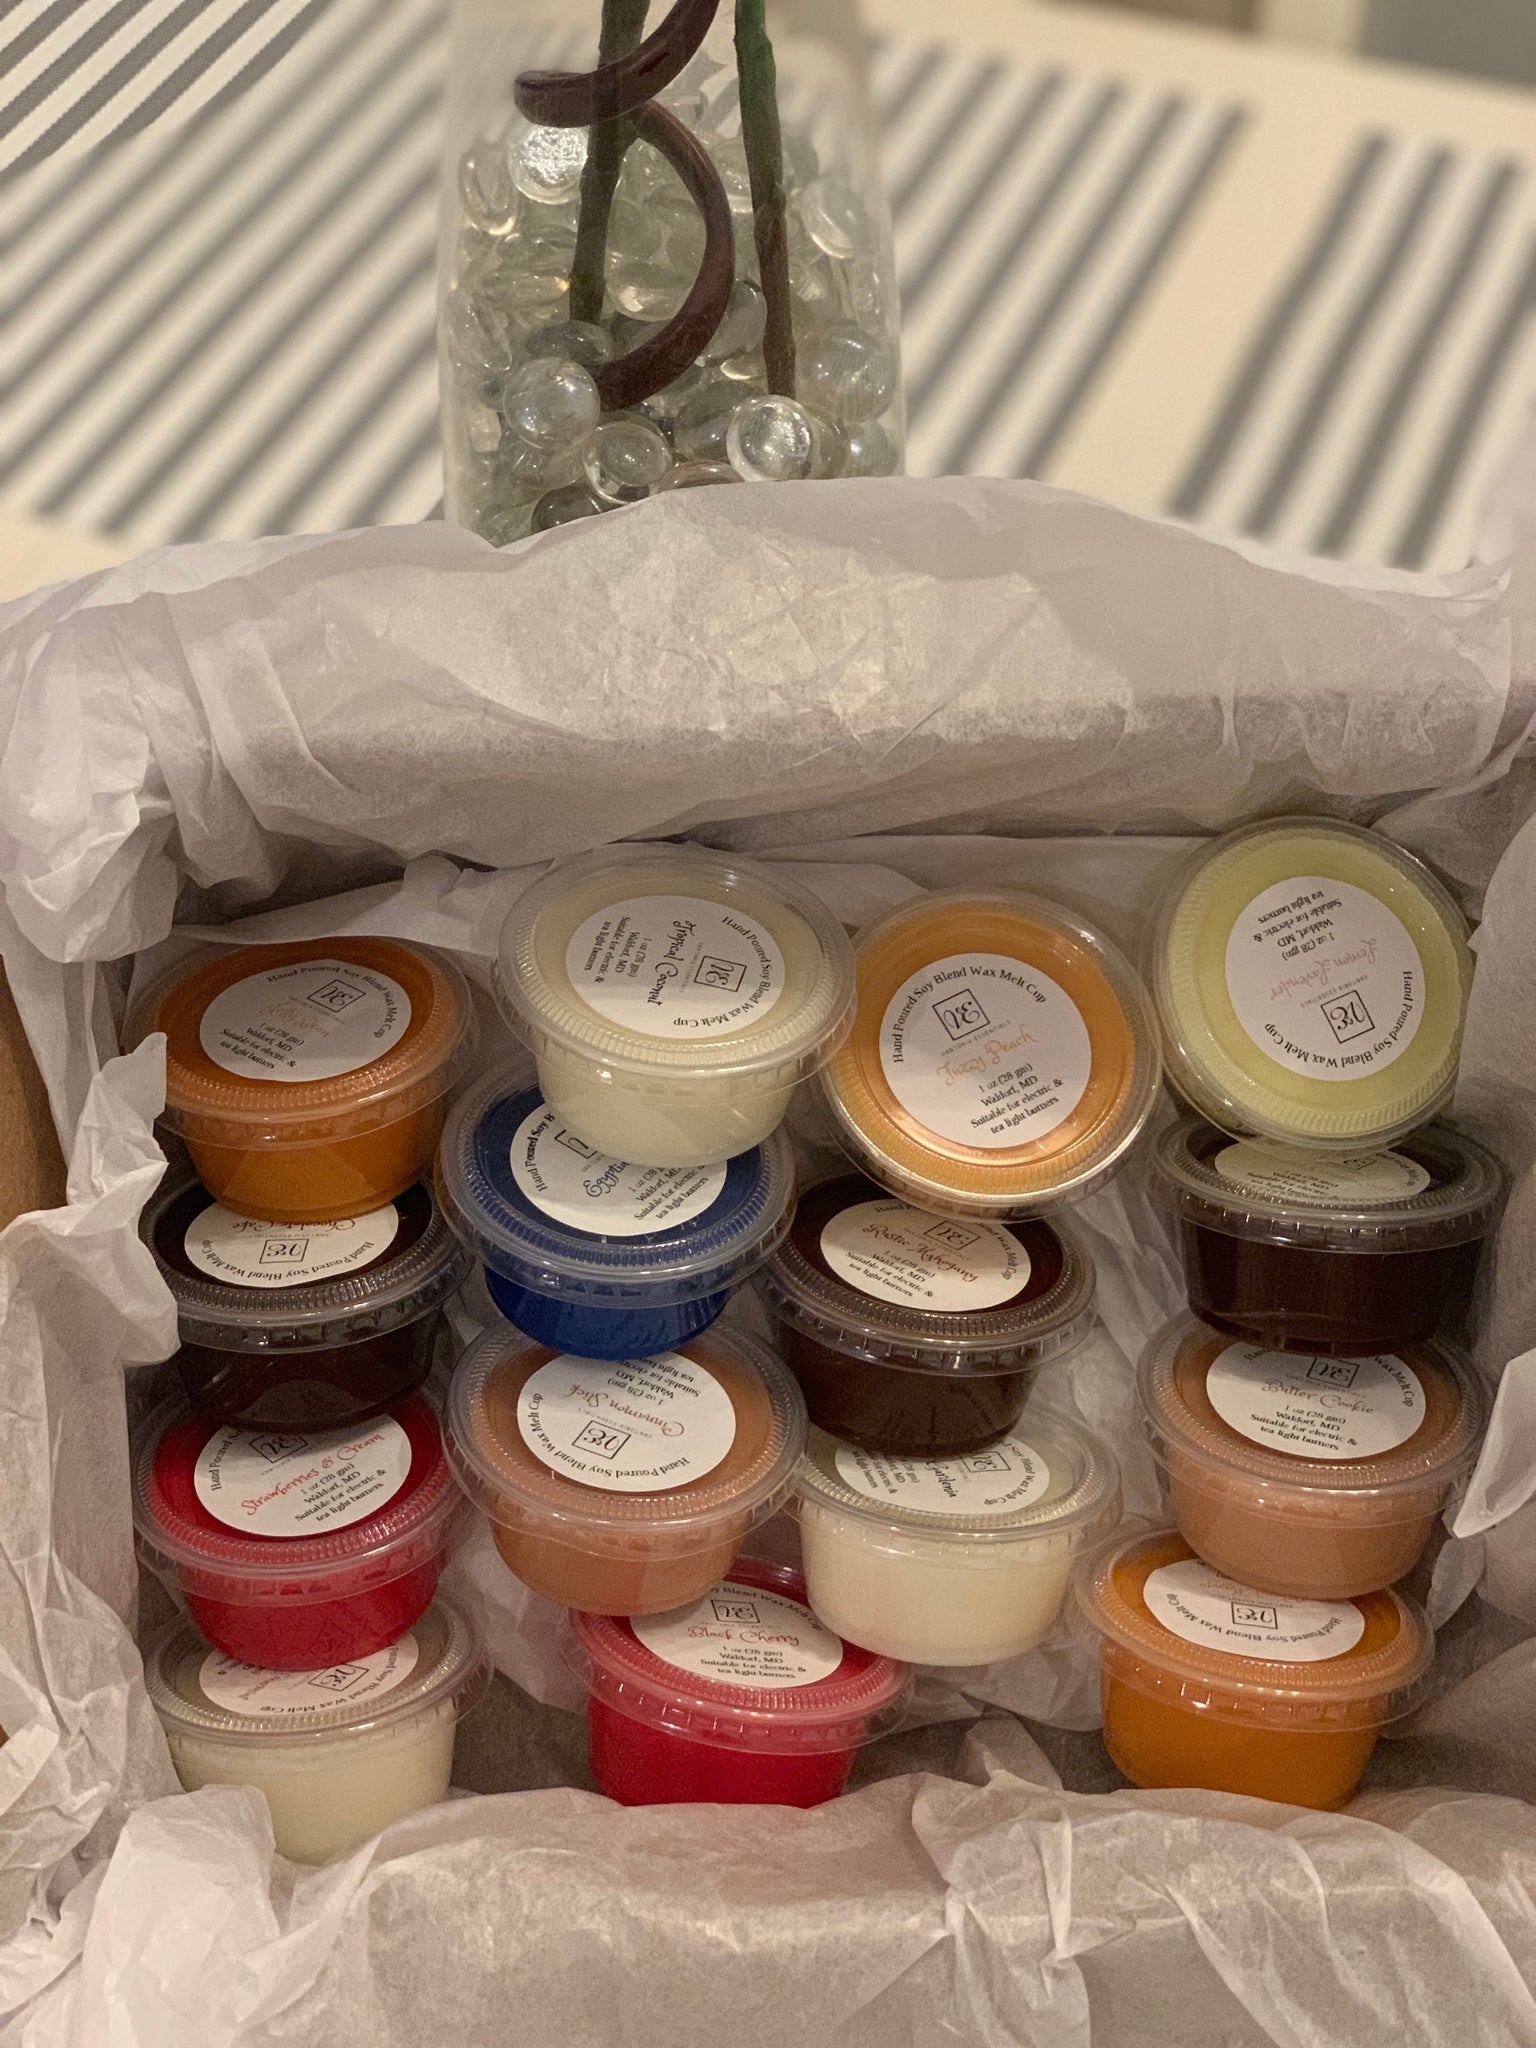 Scented wax melt samples